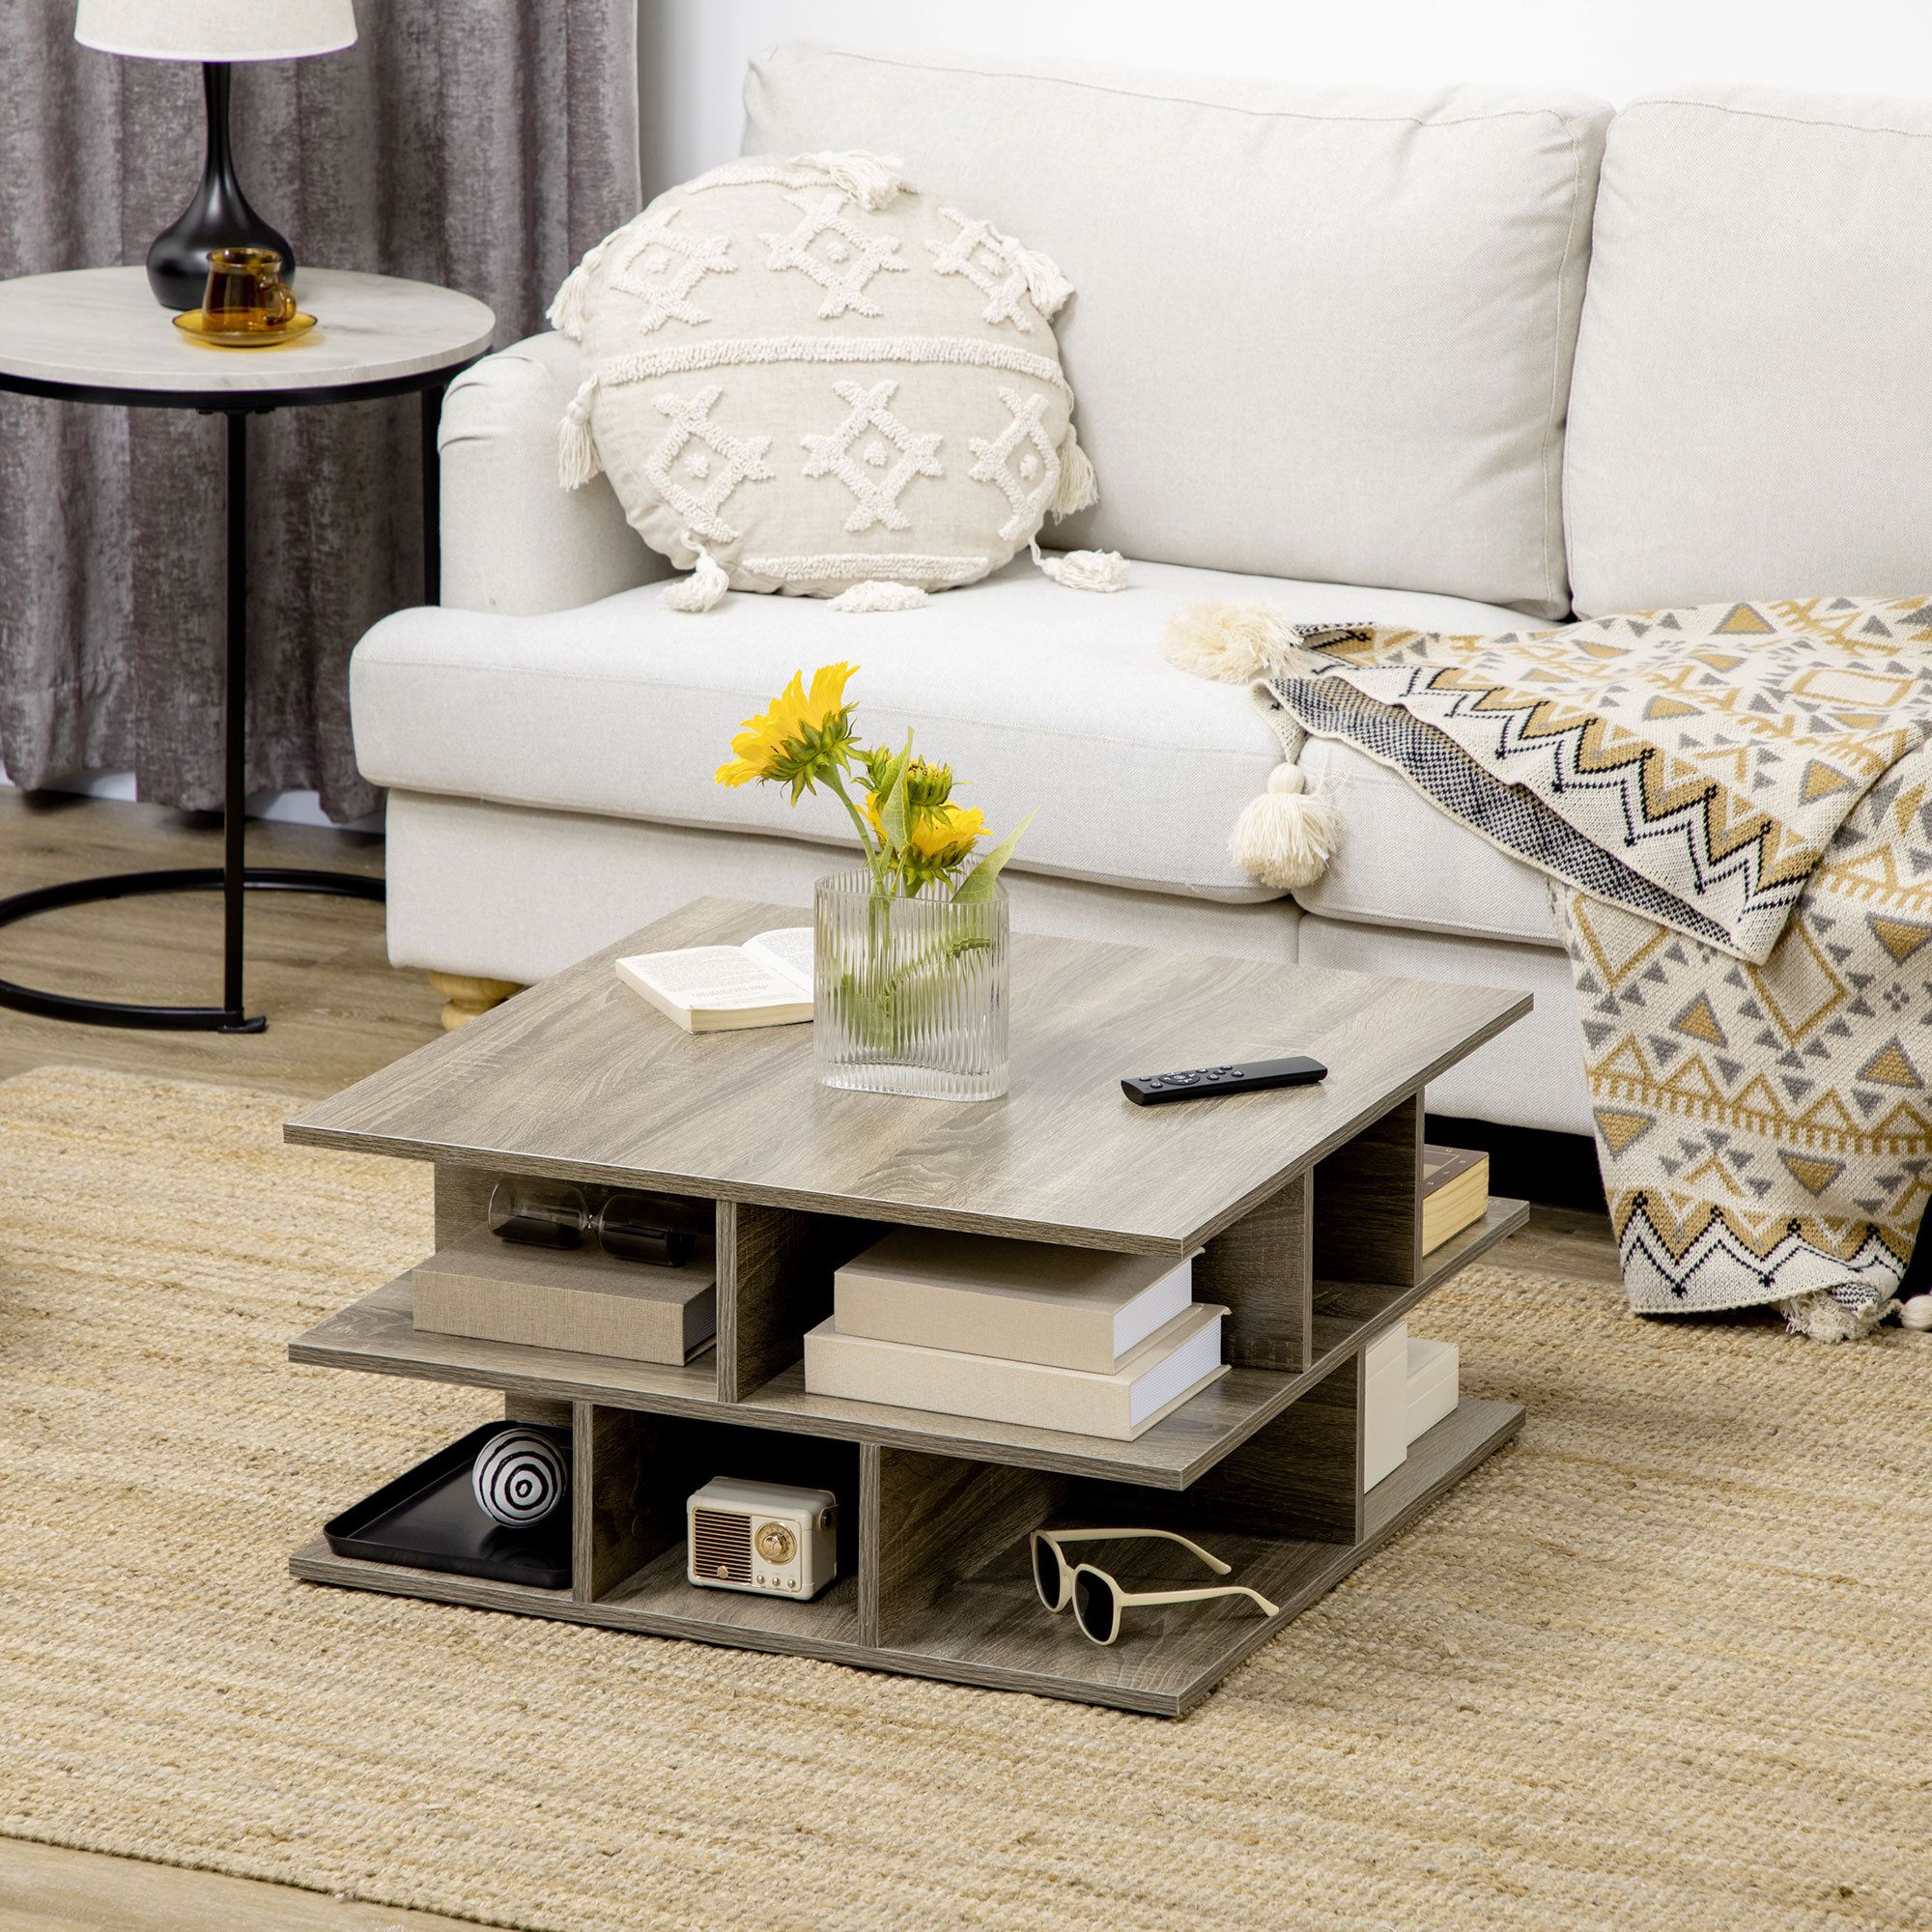 17 Stories Floor Shelf Coffee Table With Storage & Reviews | Wayfair.co.uk With Regard To Coffee Tables With Open Storage Shelves (Photo 12 of 15)